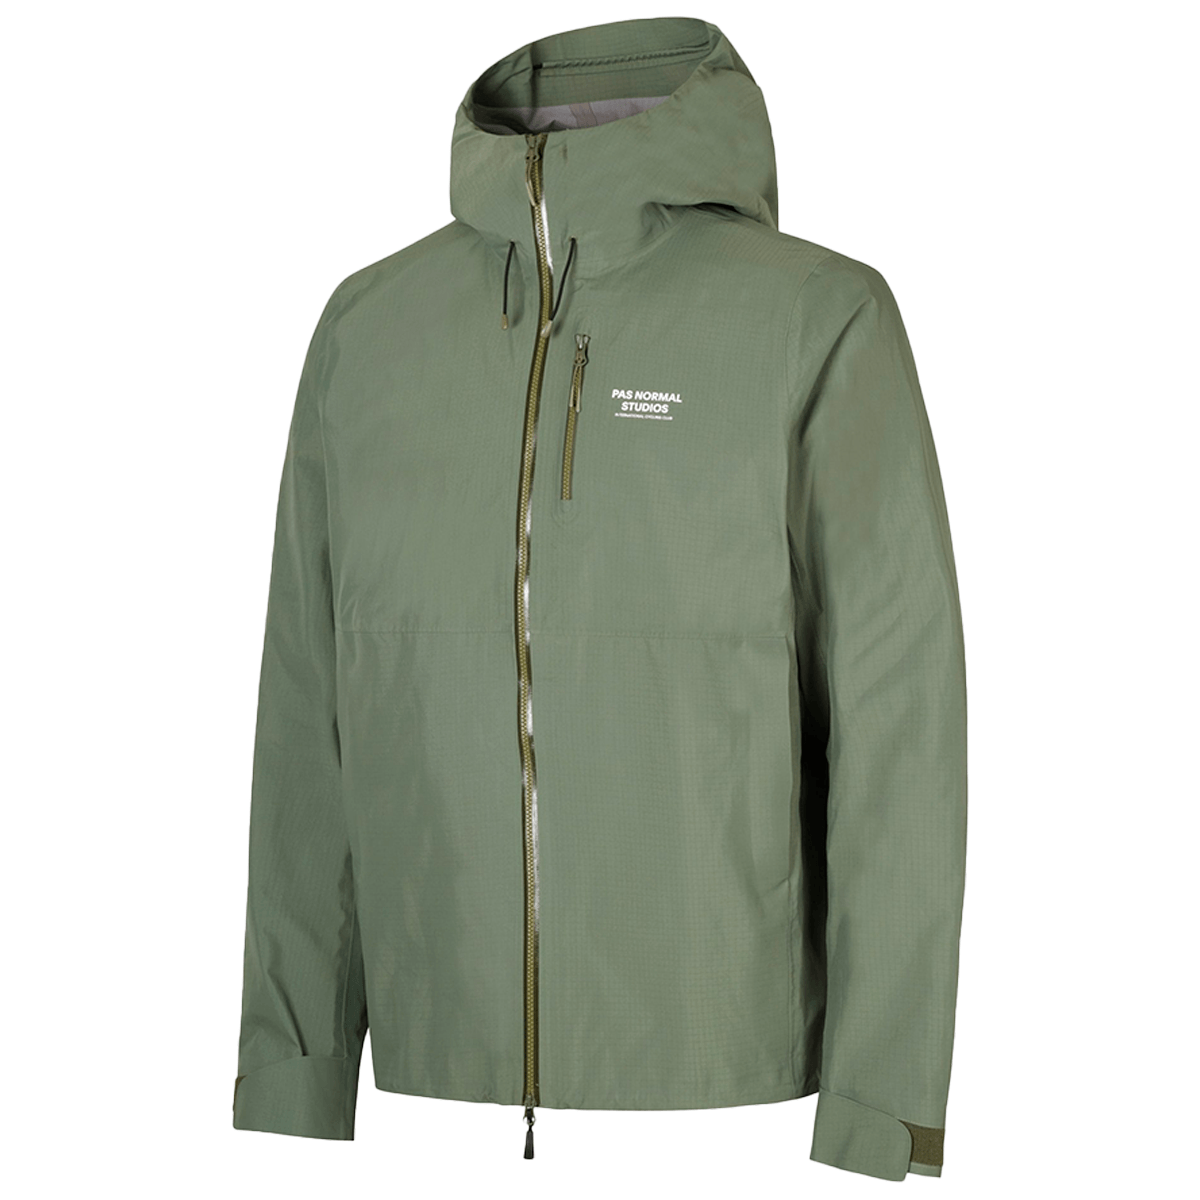 Men's Escapism Shell Jacket - Army Green